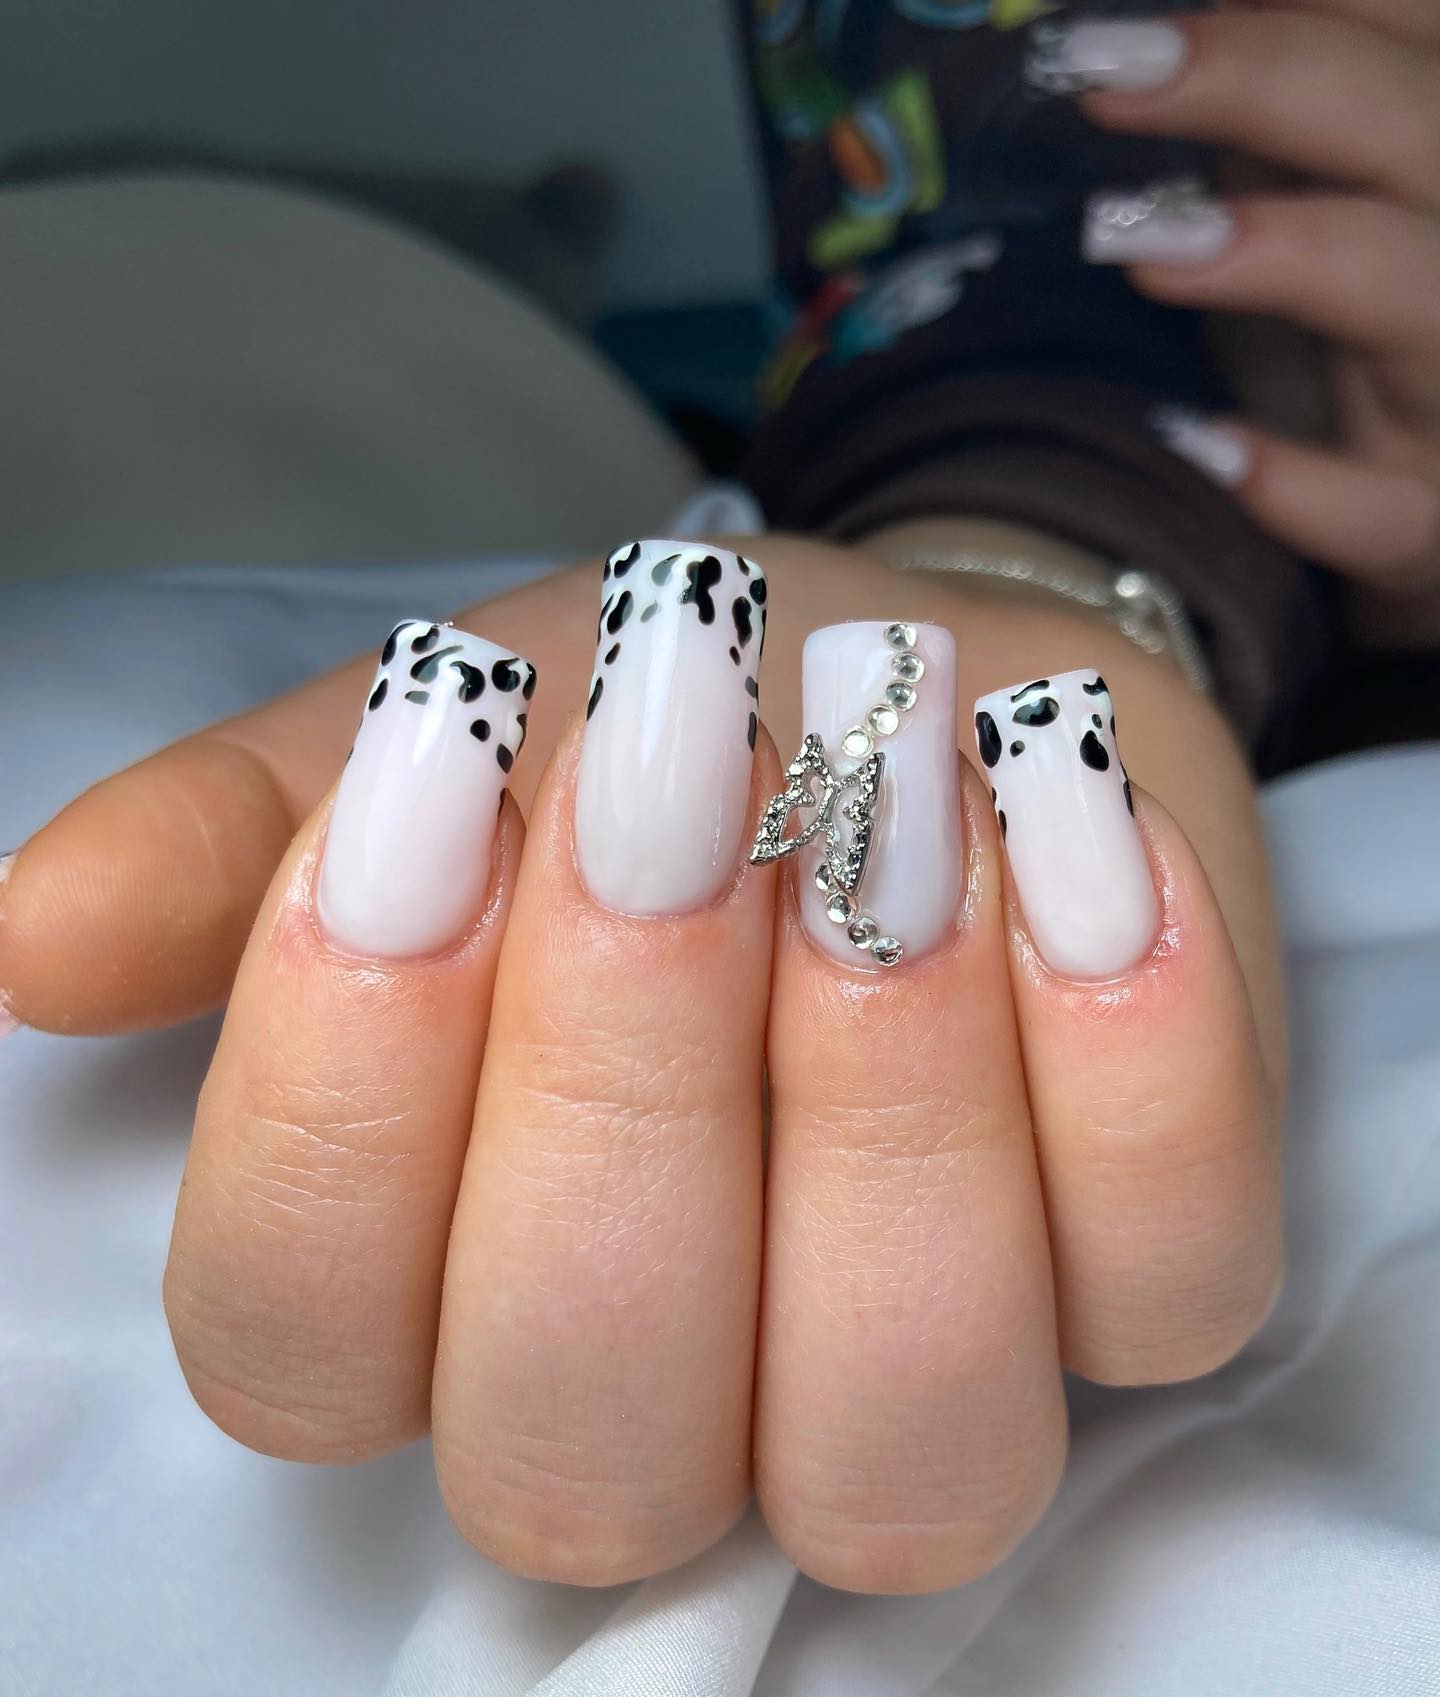 35+ Ideas For Gorgeous French Tip Nails With Diamonds